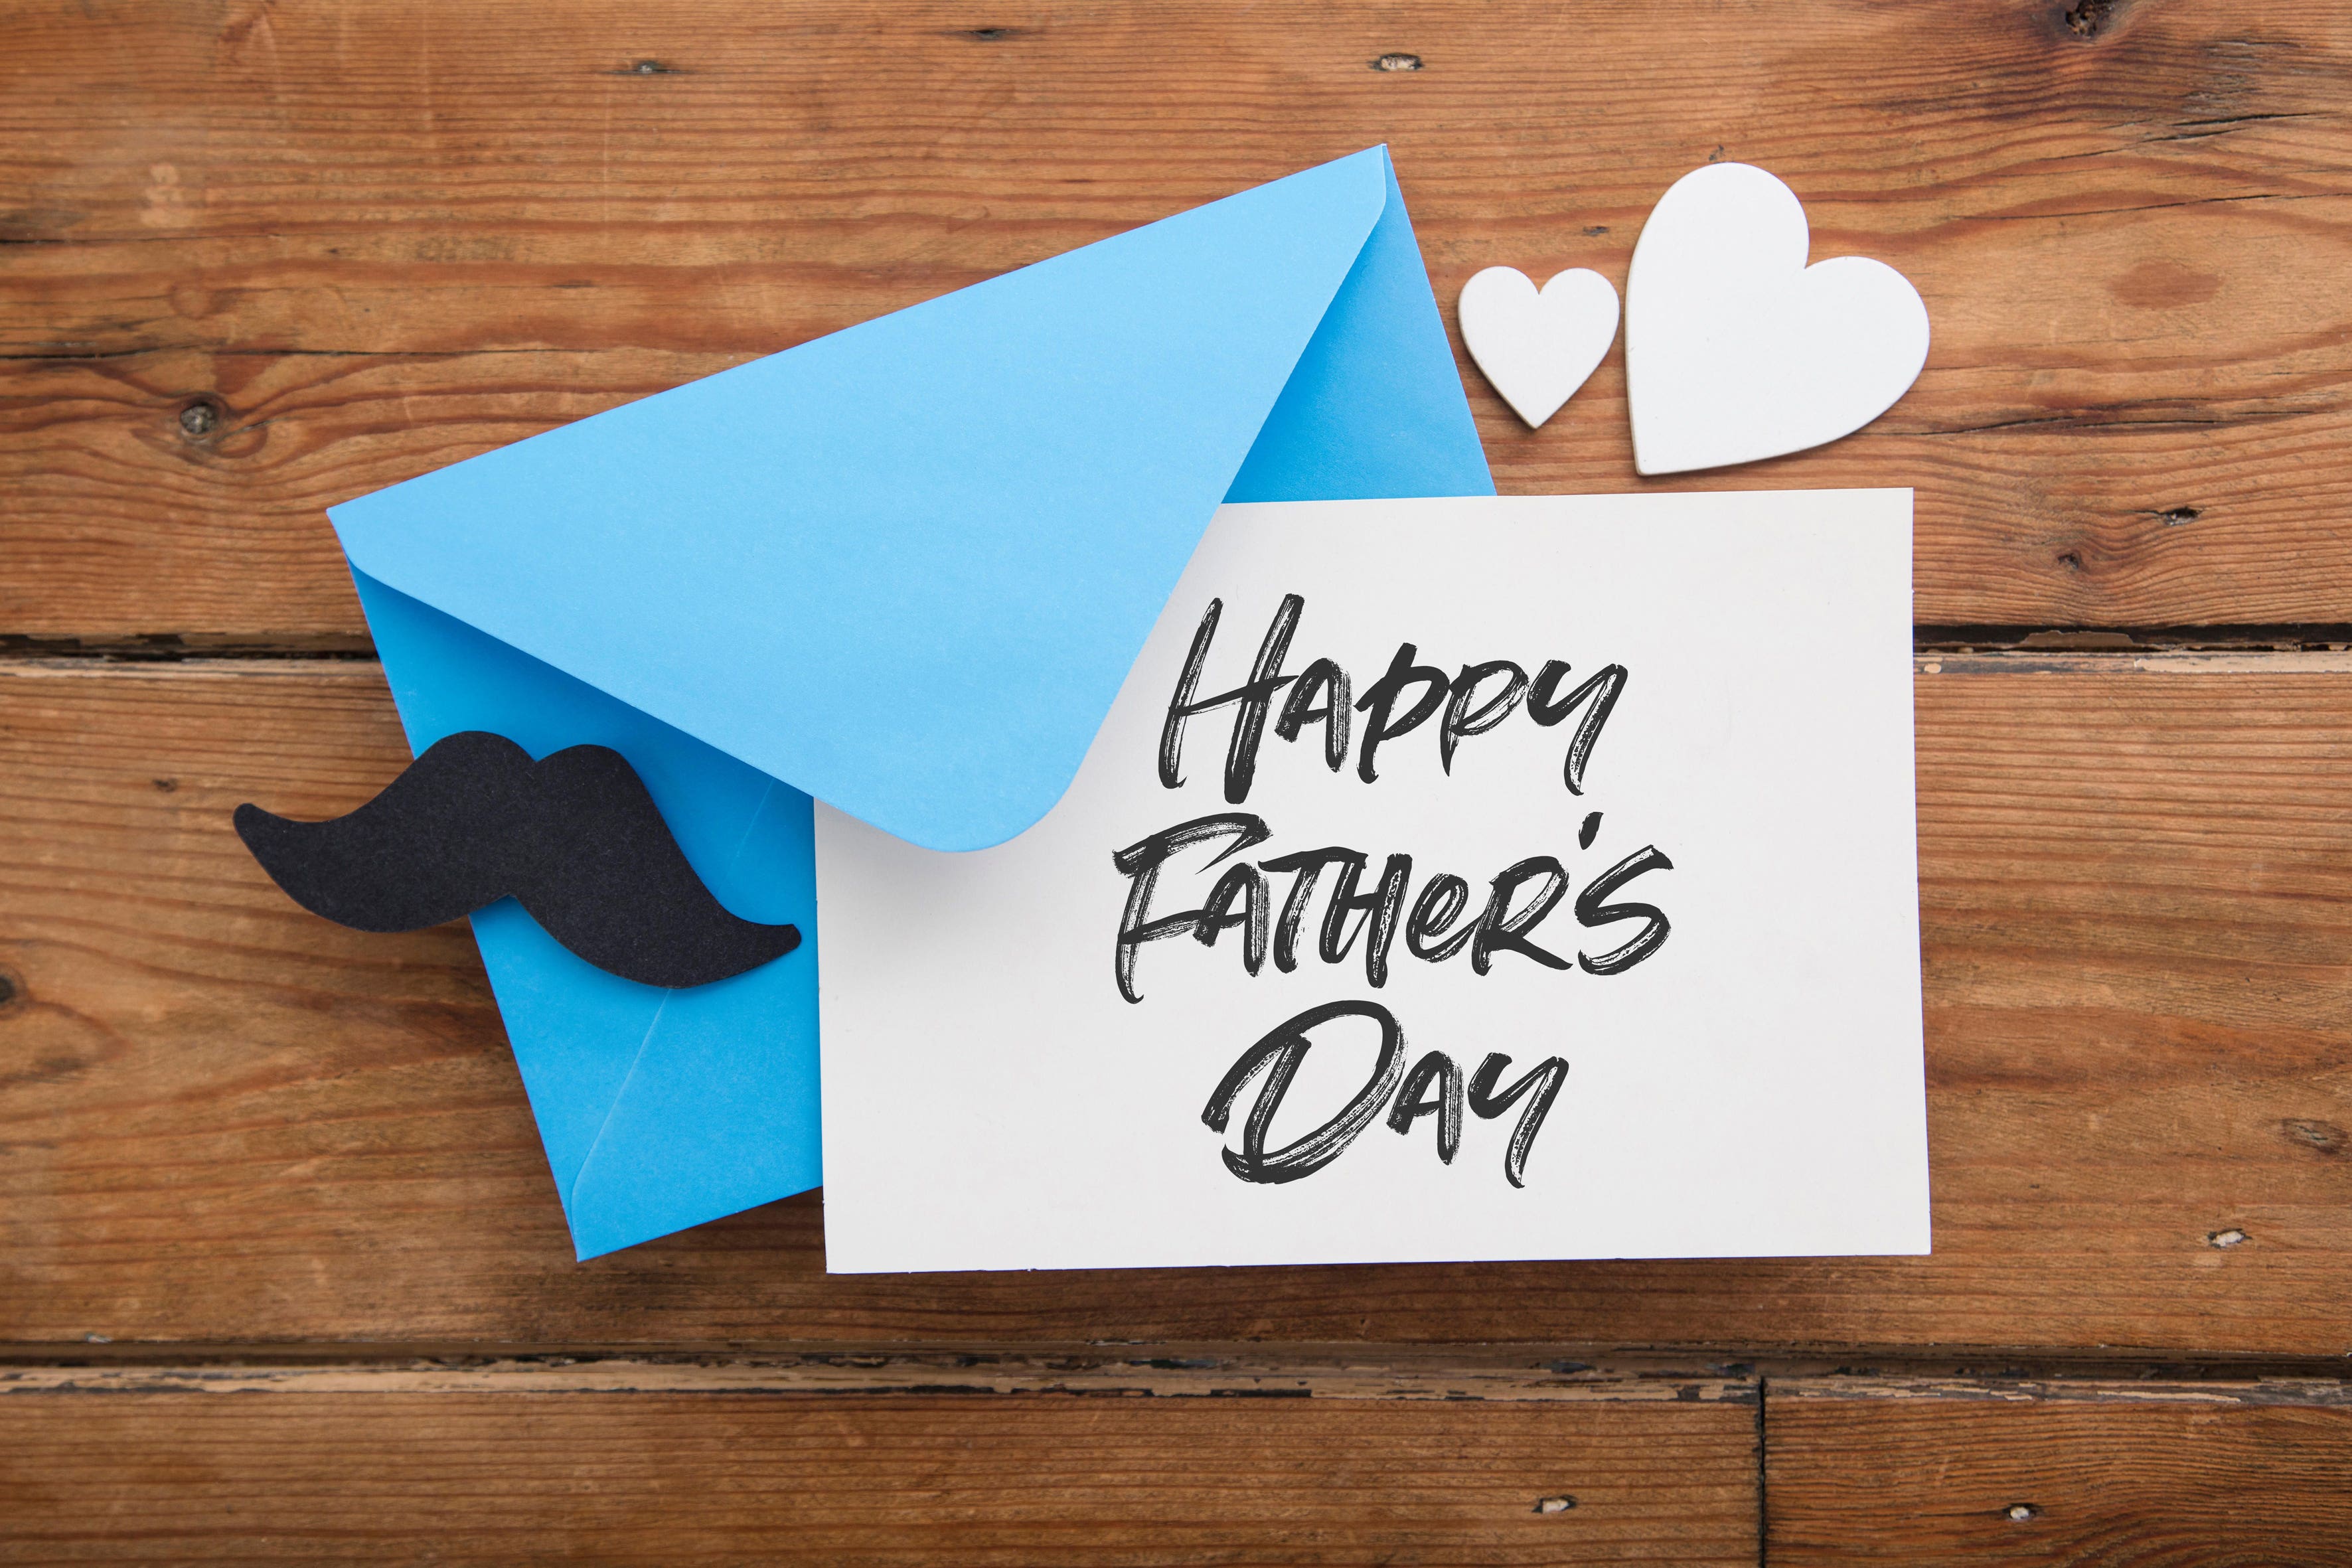 Father's day gifts on a budget! – Student Life